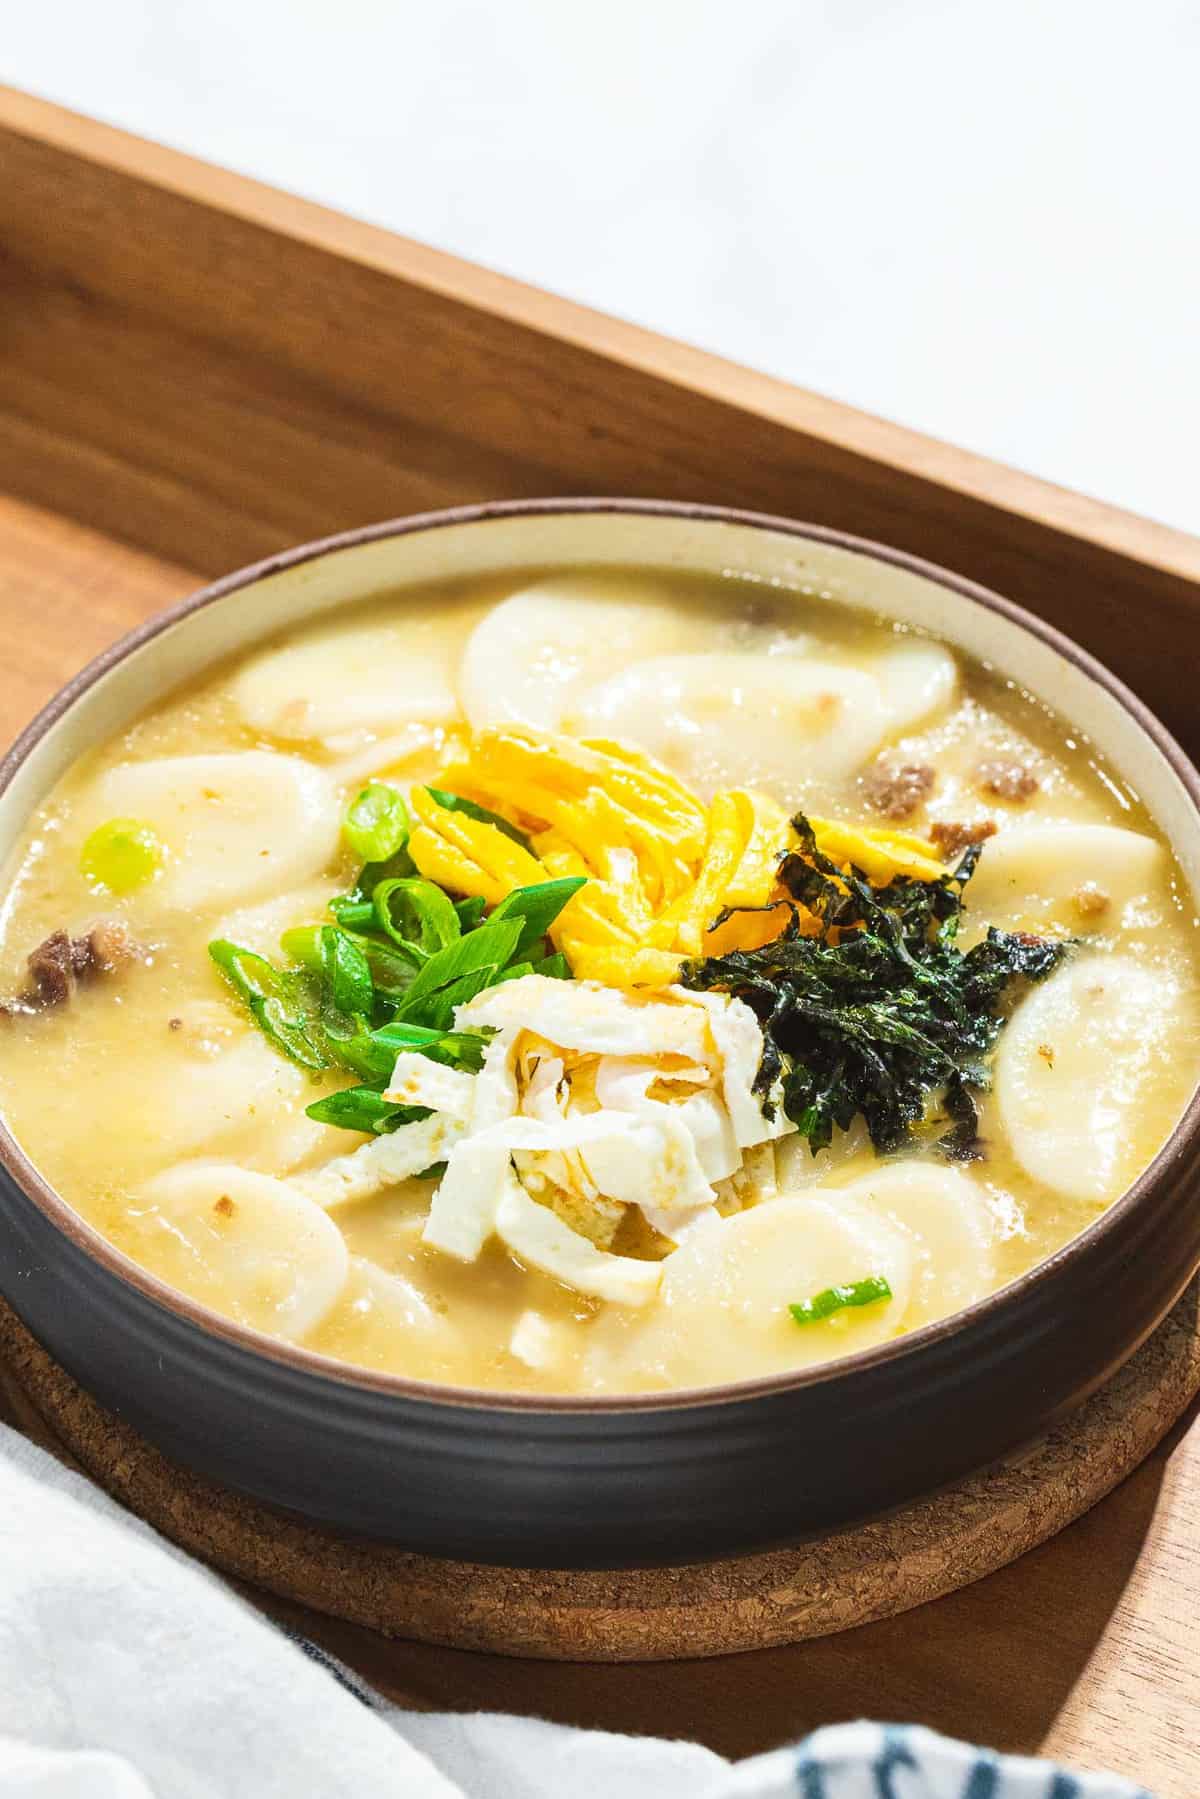 Tteokguk or Korean rice cake soup garnished with eggs, seaweed, and scallions.